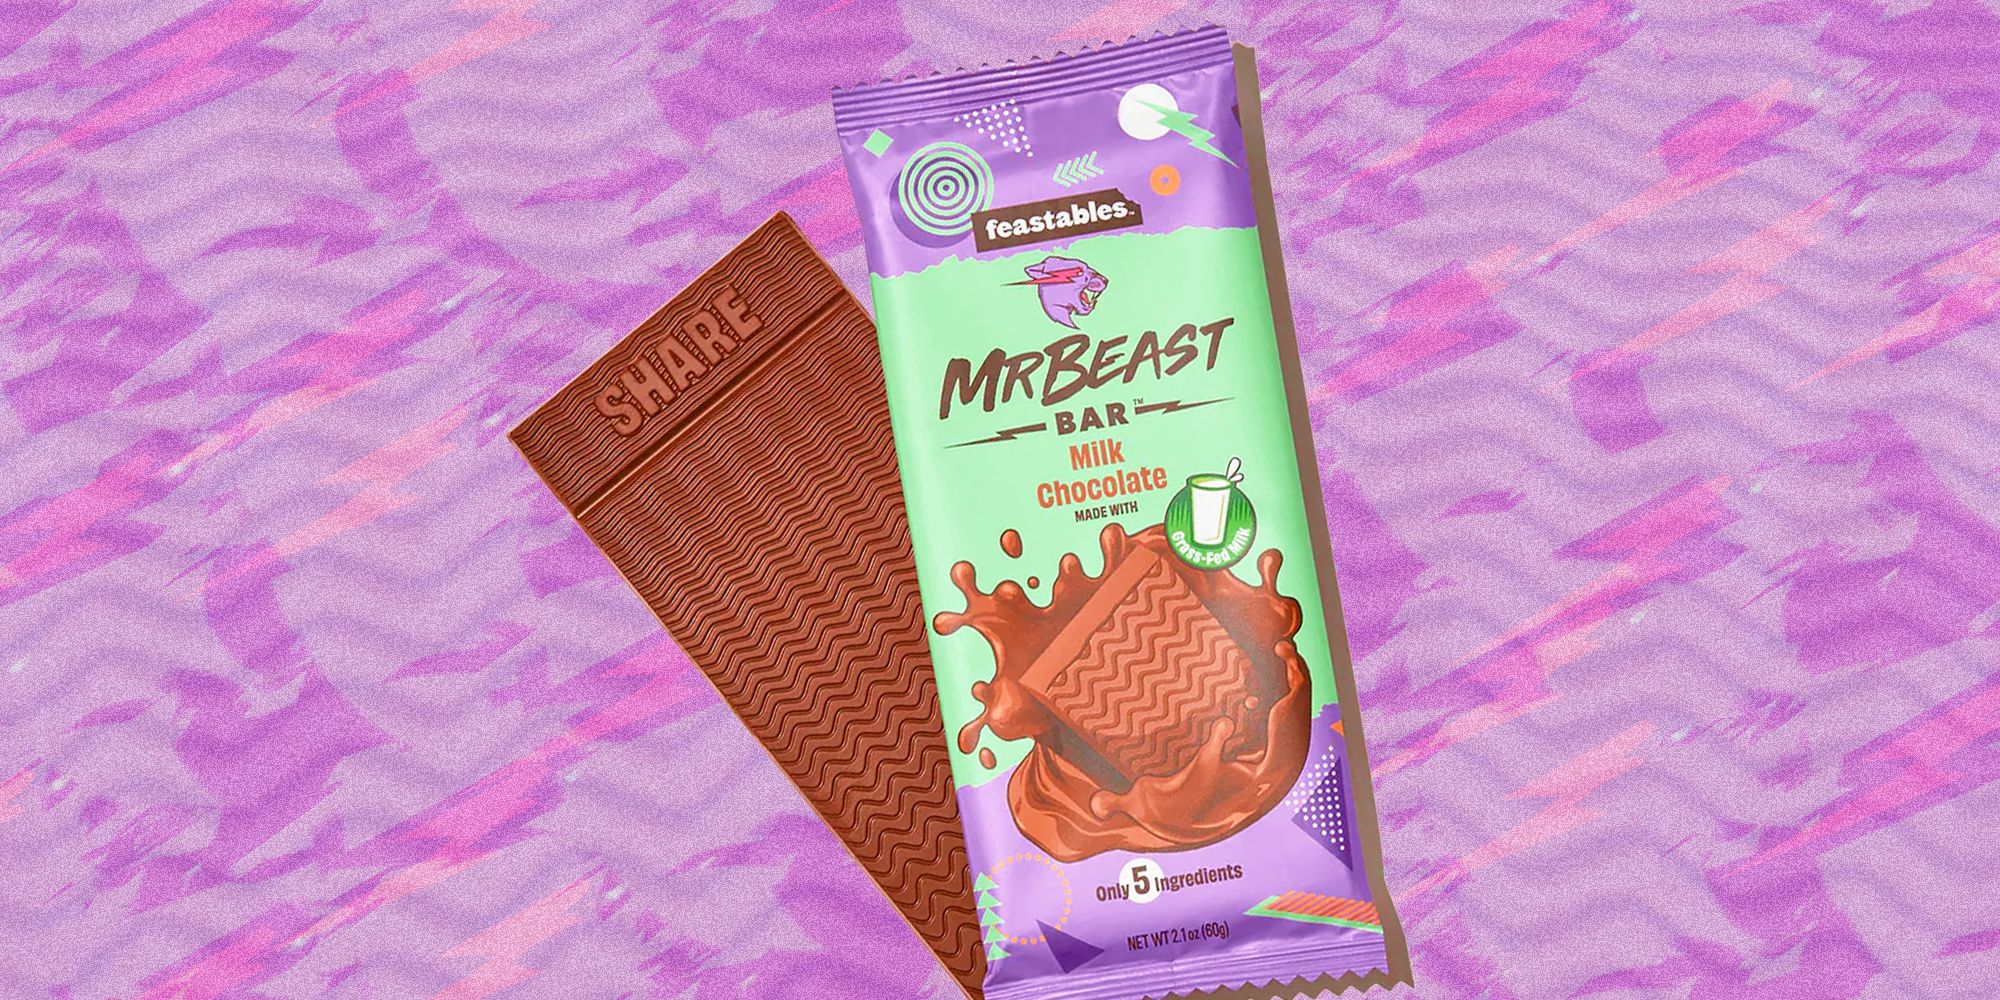 MrBeast and Corpse Husband have teamed up to launch the latest Feastables  chocolate bar - Tubefilter